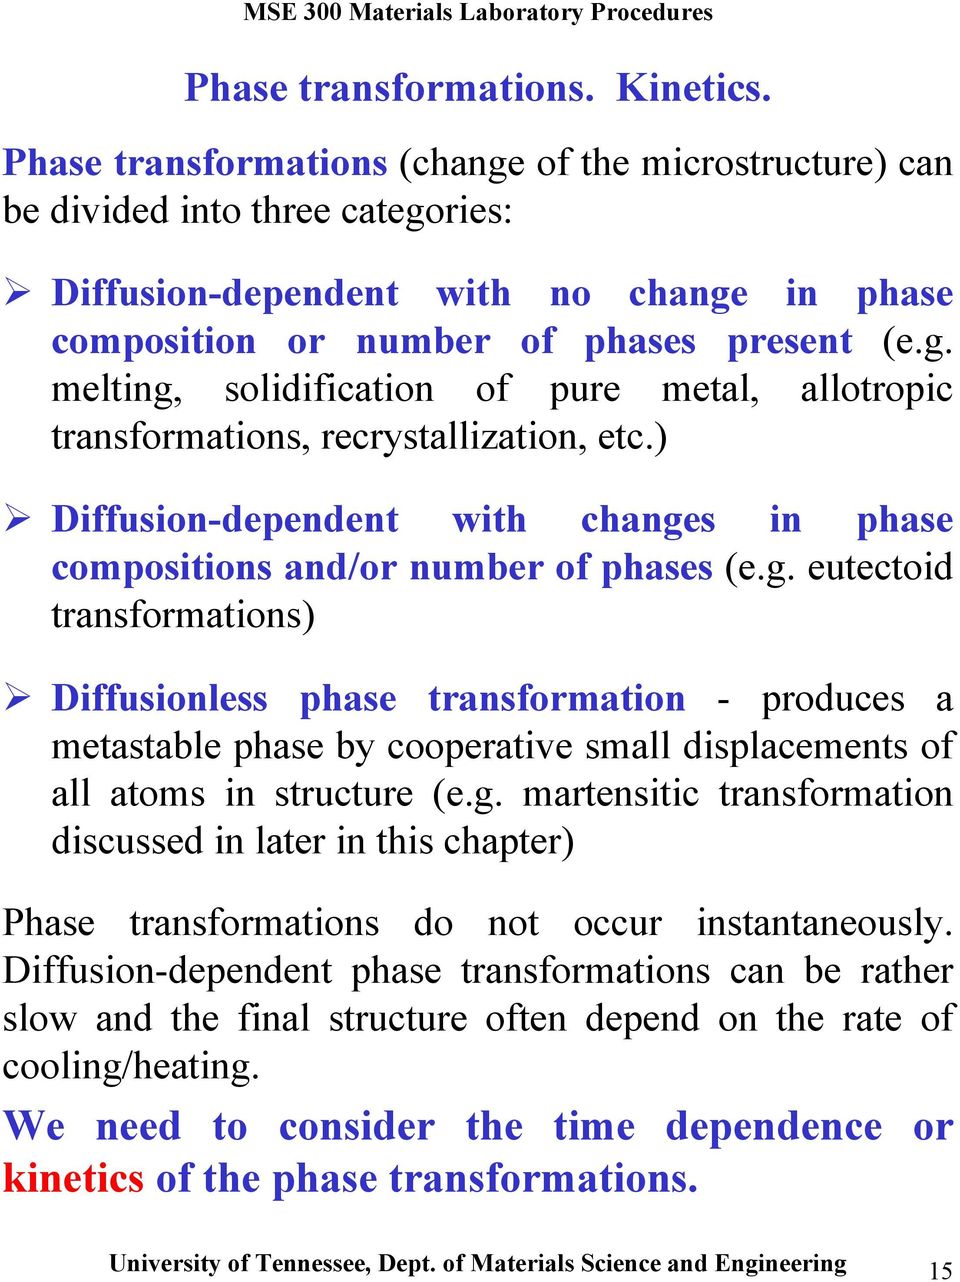 ) Diffusion-dependent with changes in phase compositions and/or number of phases (e.g. eutectoid transformations) Diffusionless phase transformation - produces a metastable phase by cooperative small displacements of all atoms in structure (e.